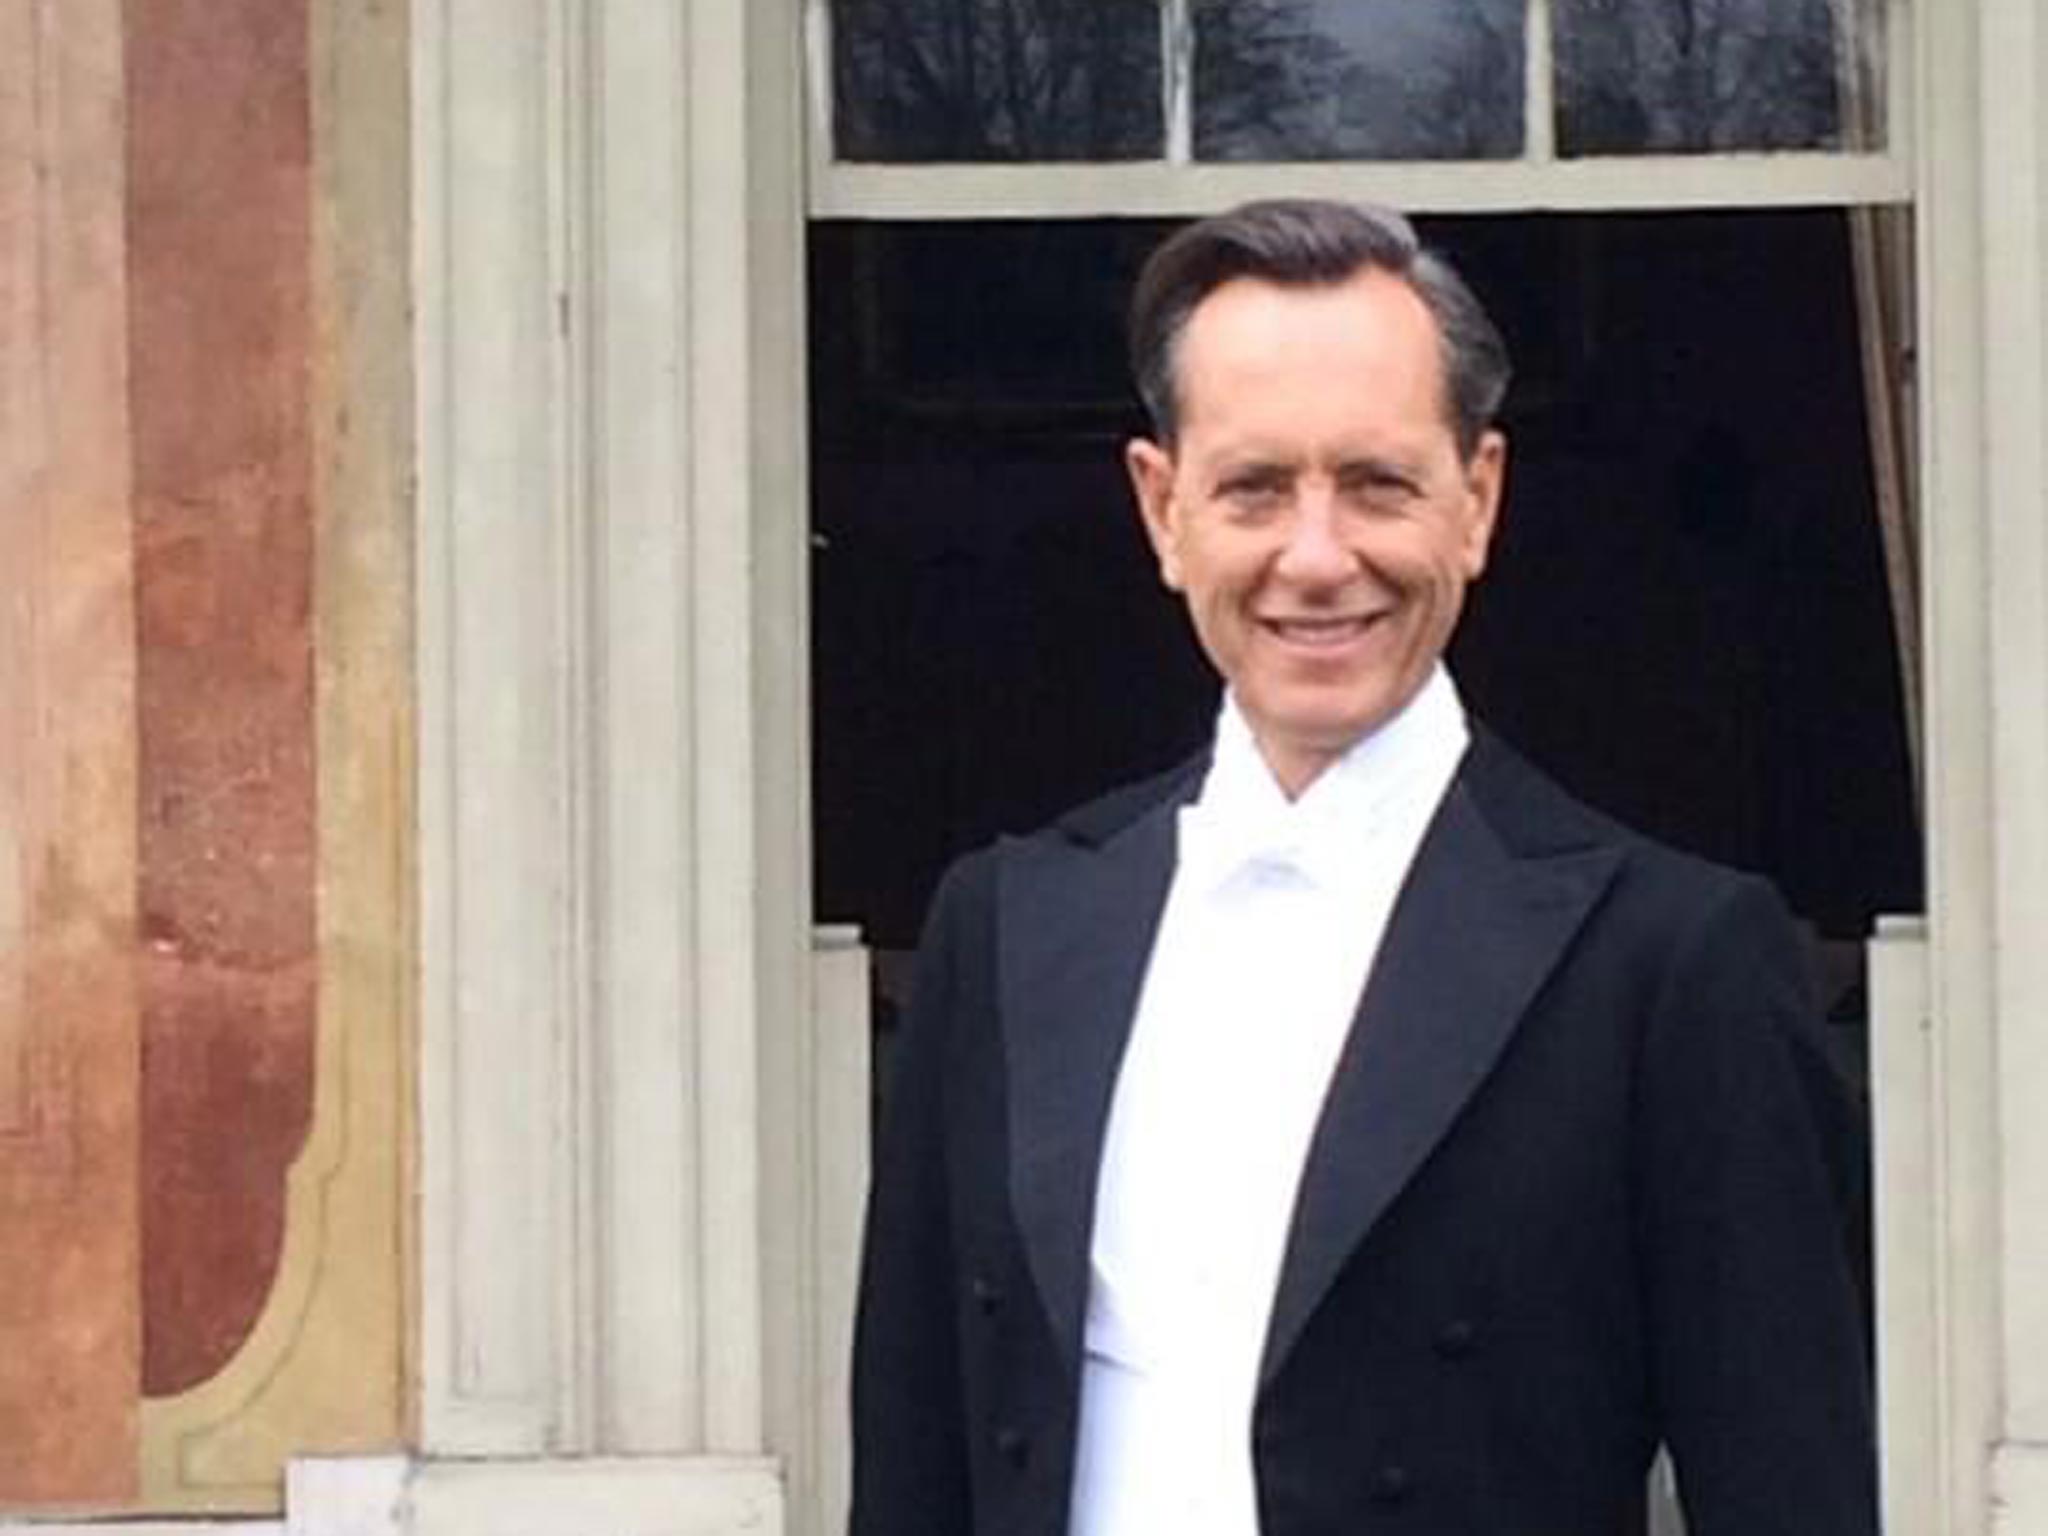 Suited and booted: Richard E Grant on the set of Downton Abbey